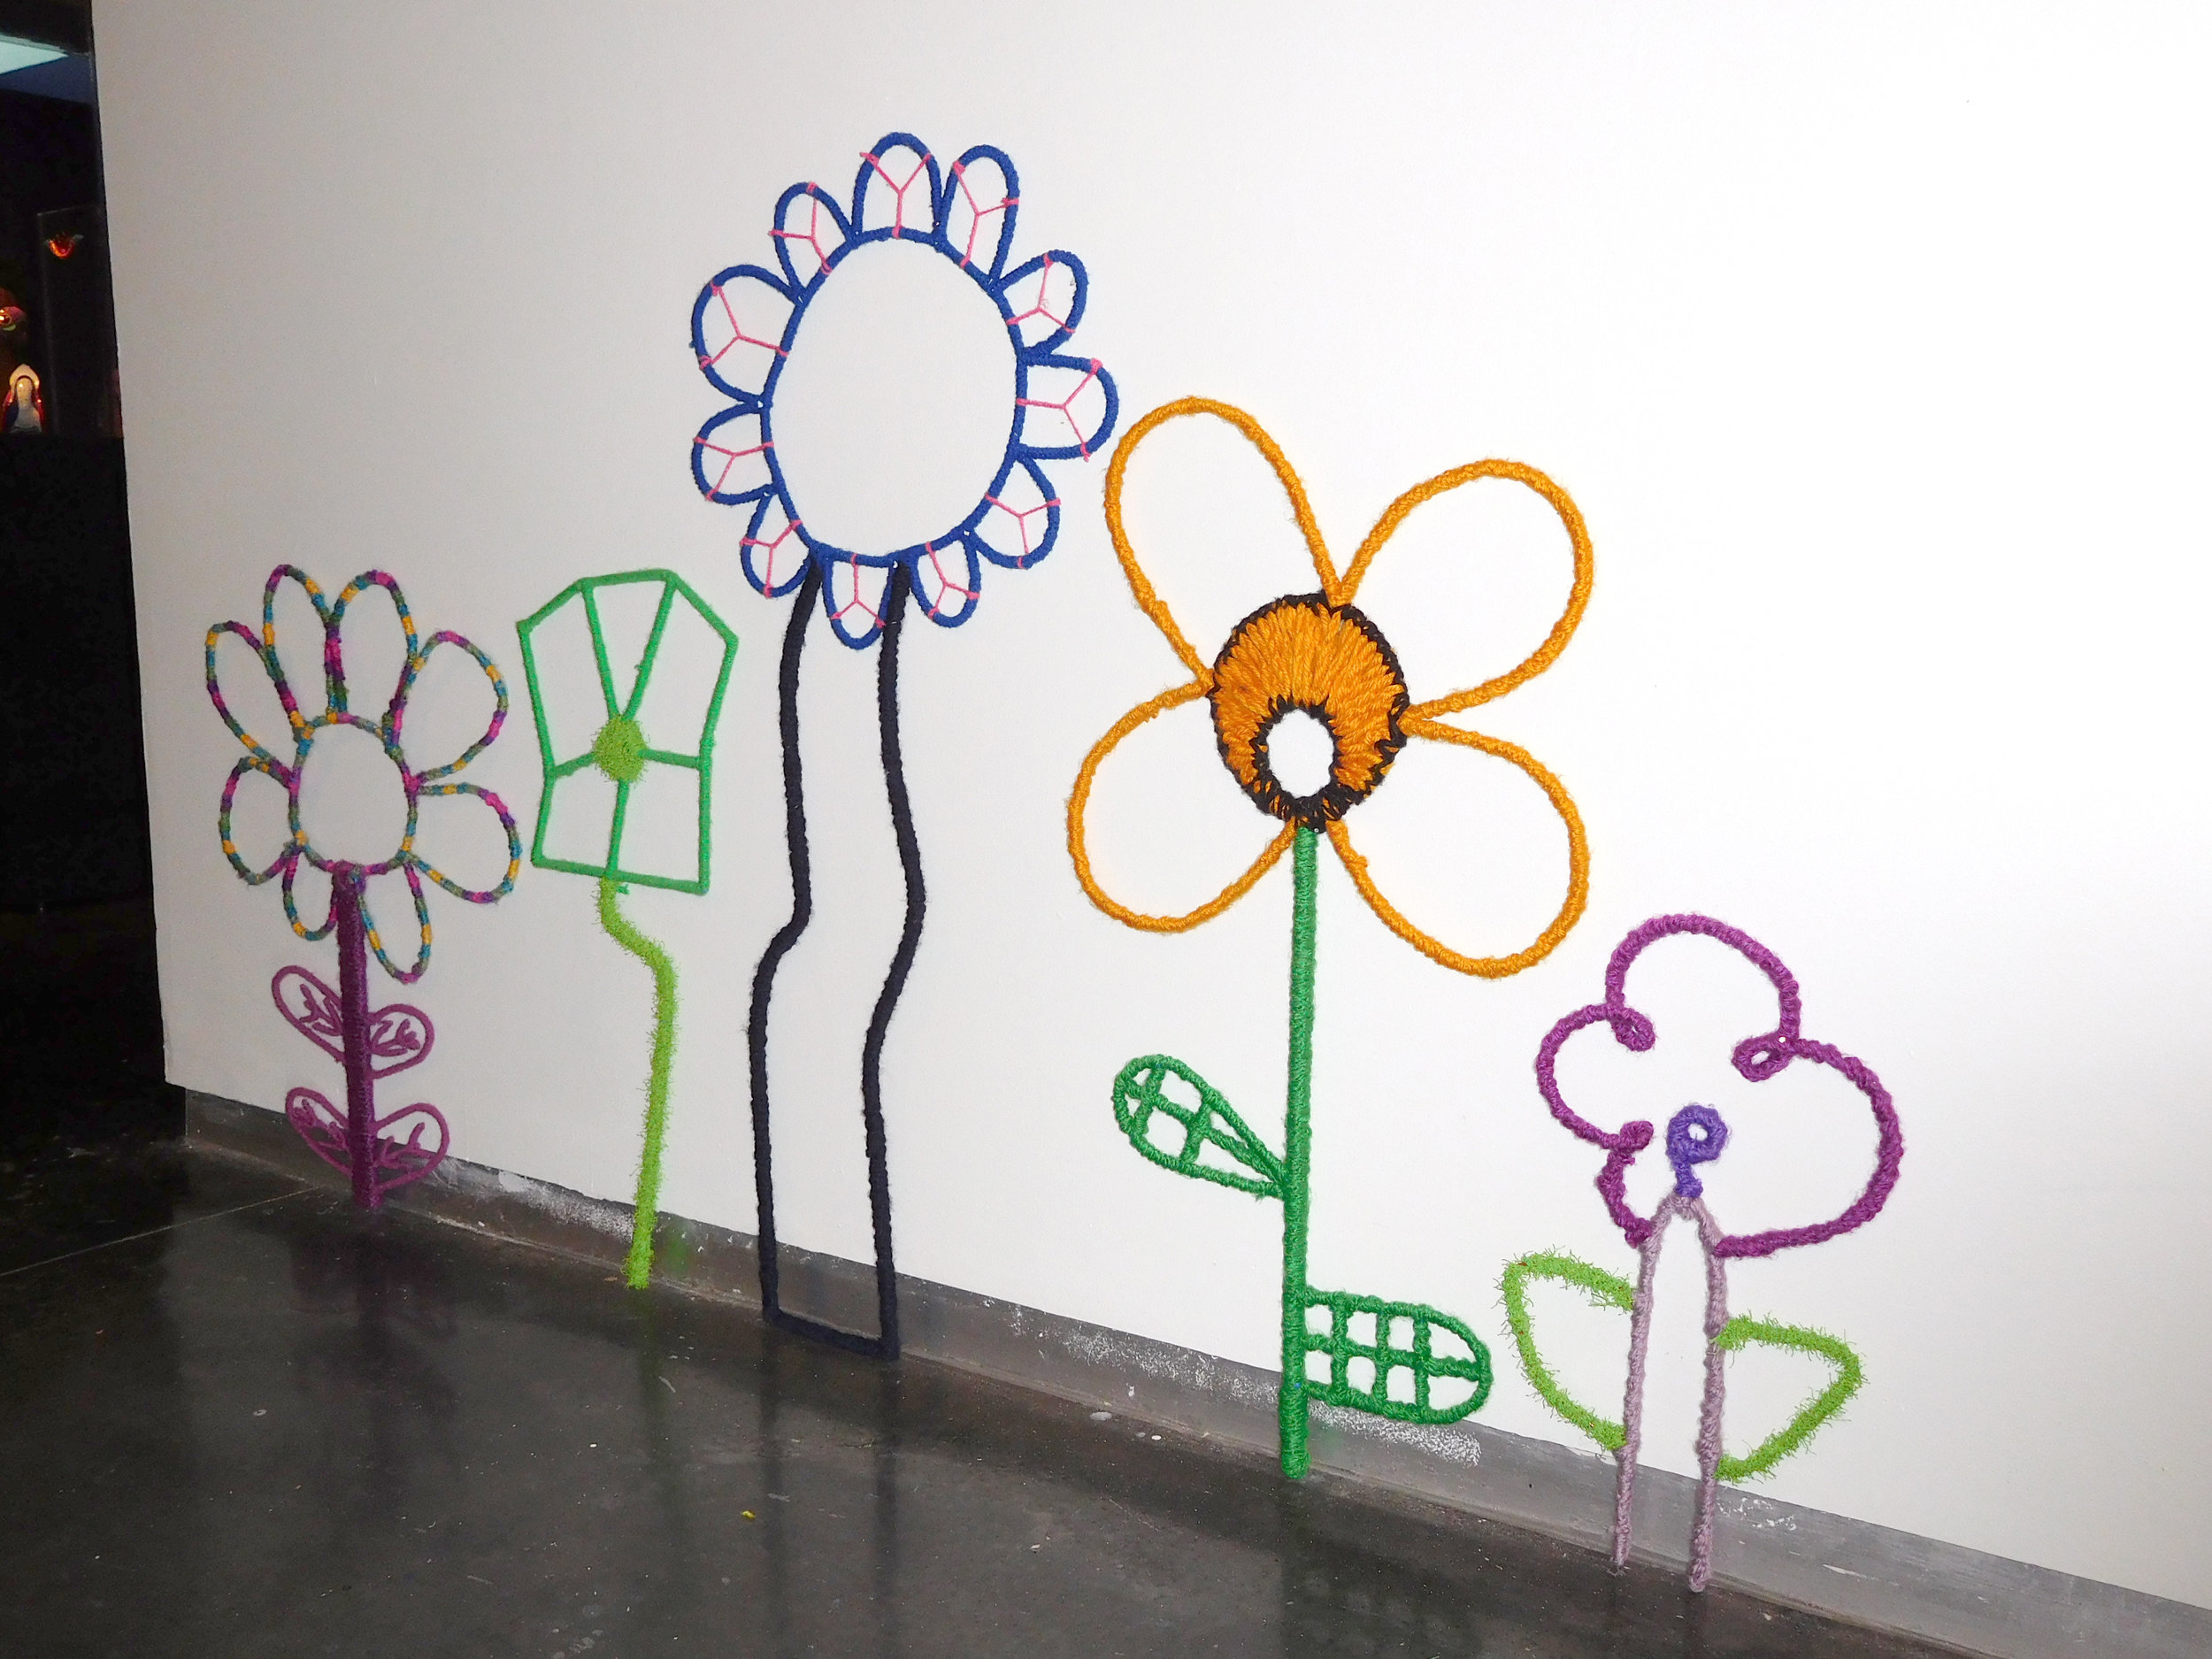 Large wired flowers made from kids' drawings